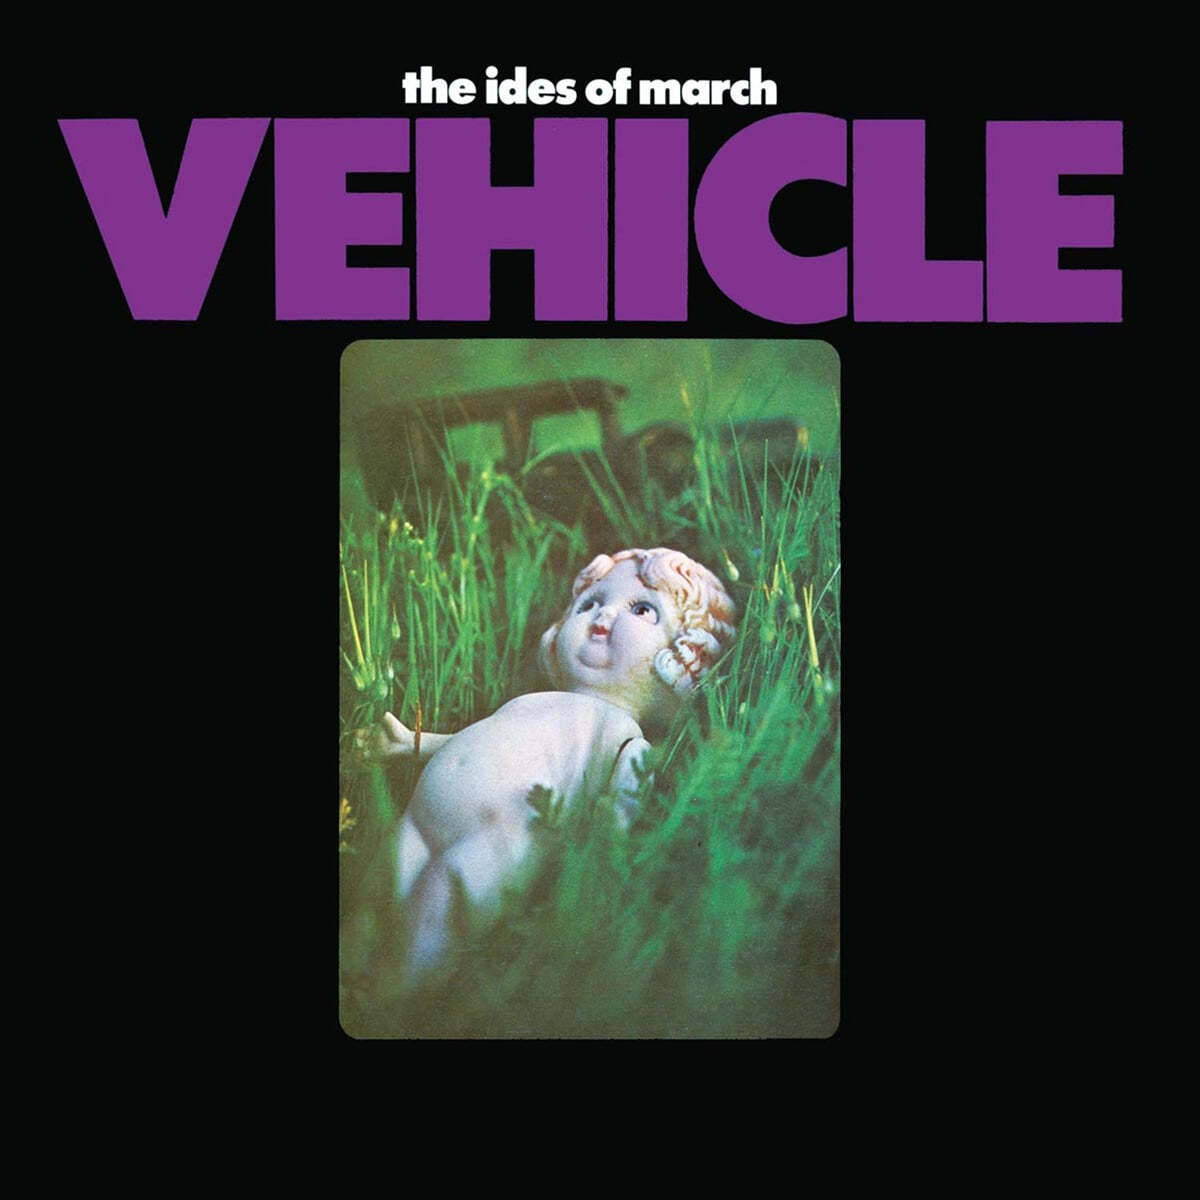 The Ides of March (이데스 오브 마치) - Vehicle